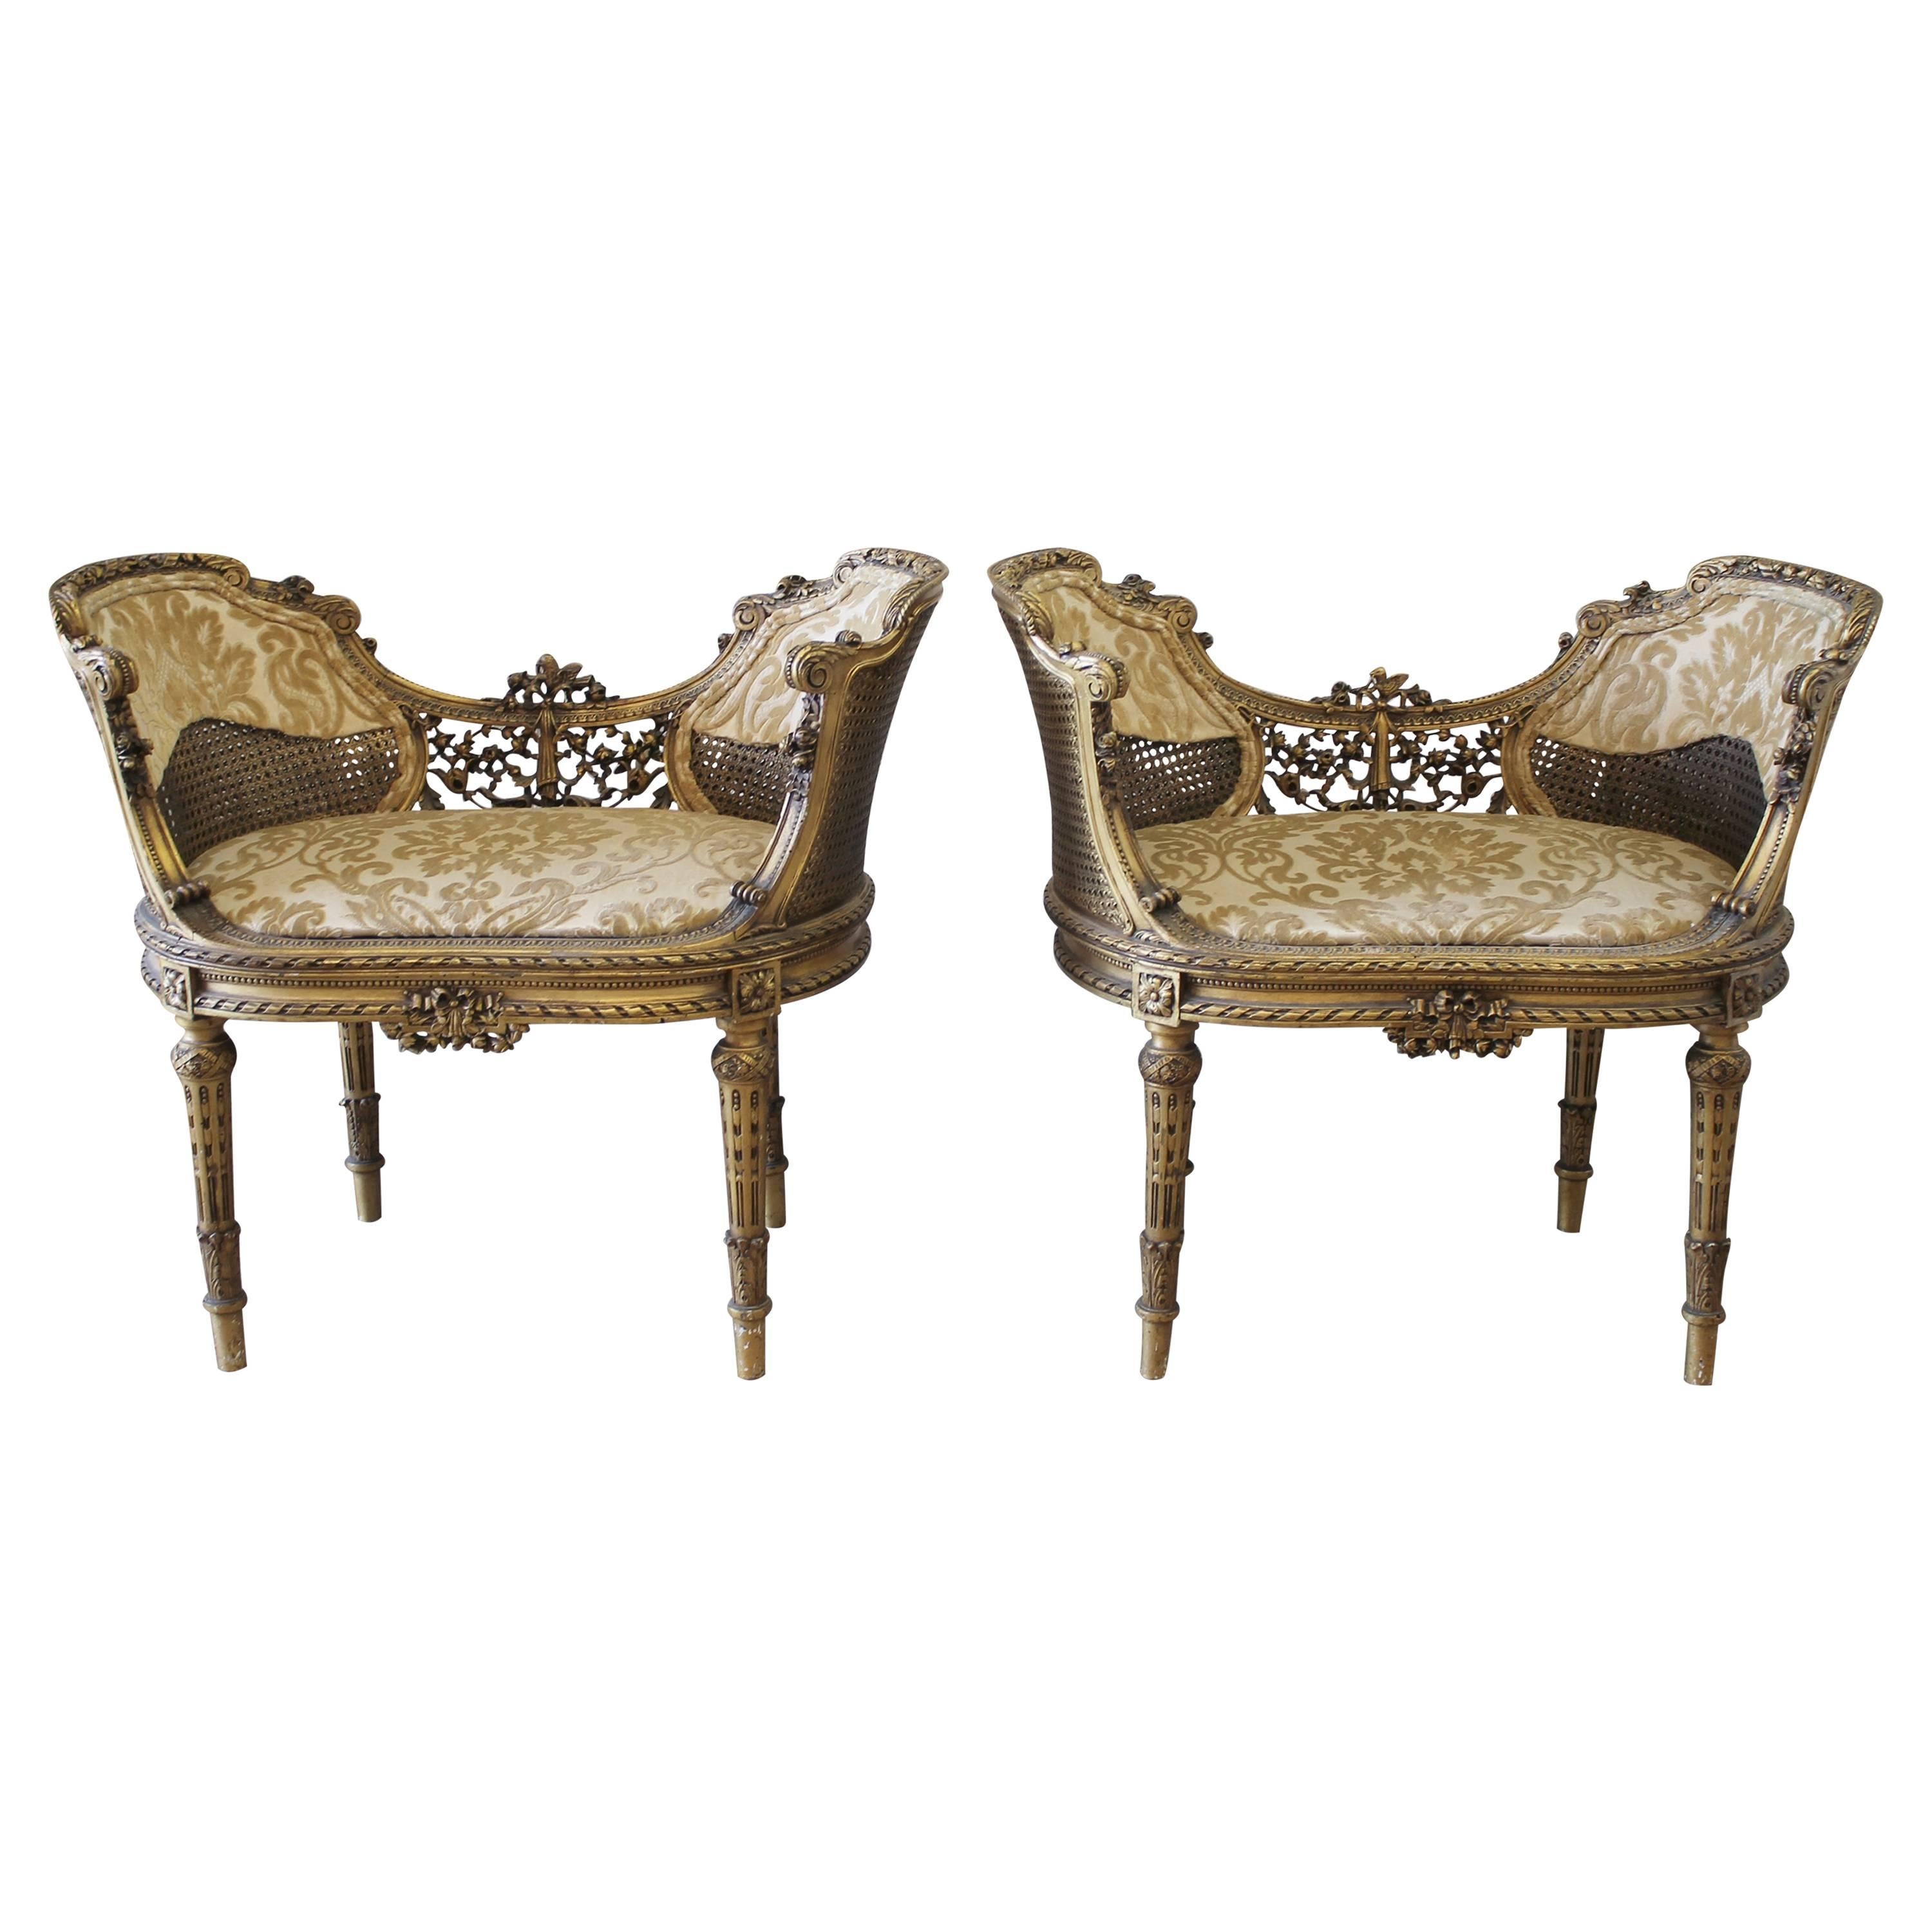 19th Century Giltwood Carved Louis XVI Style Vanity Chairs